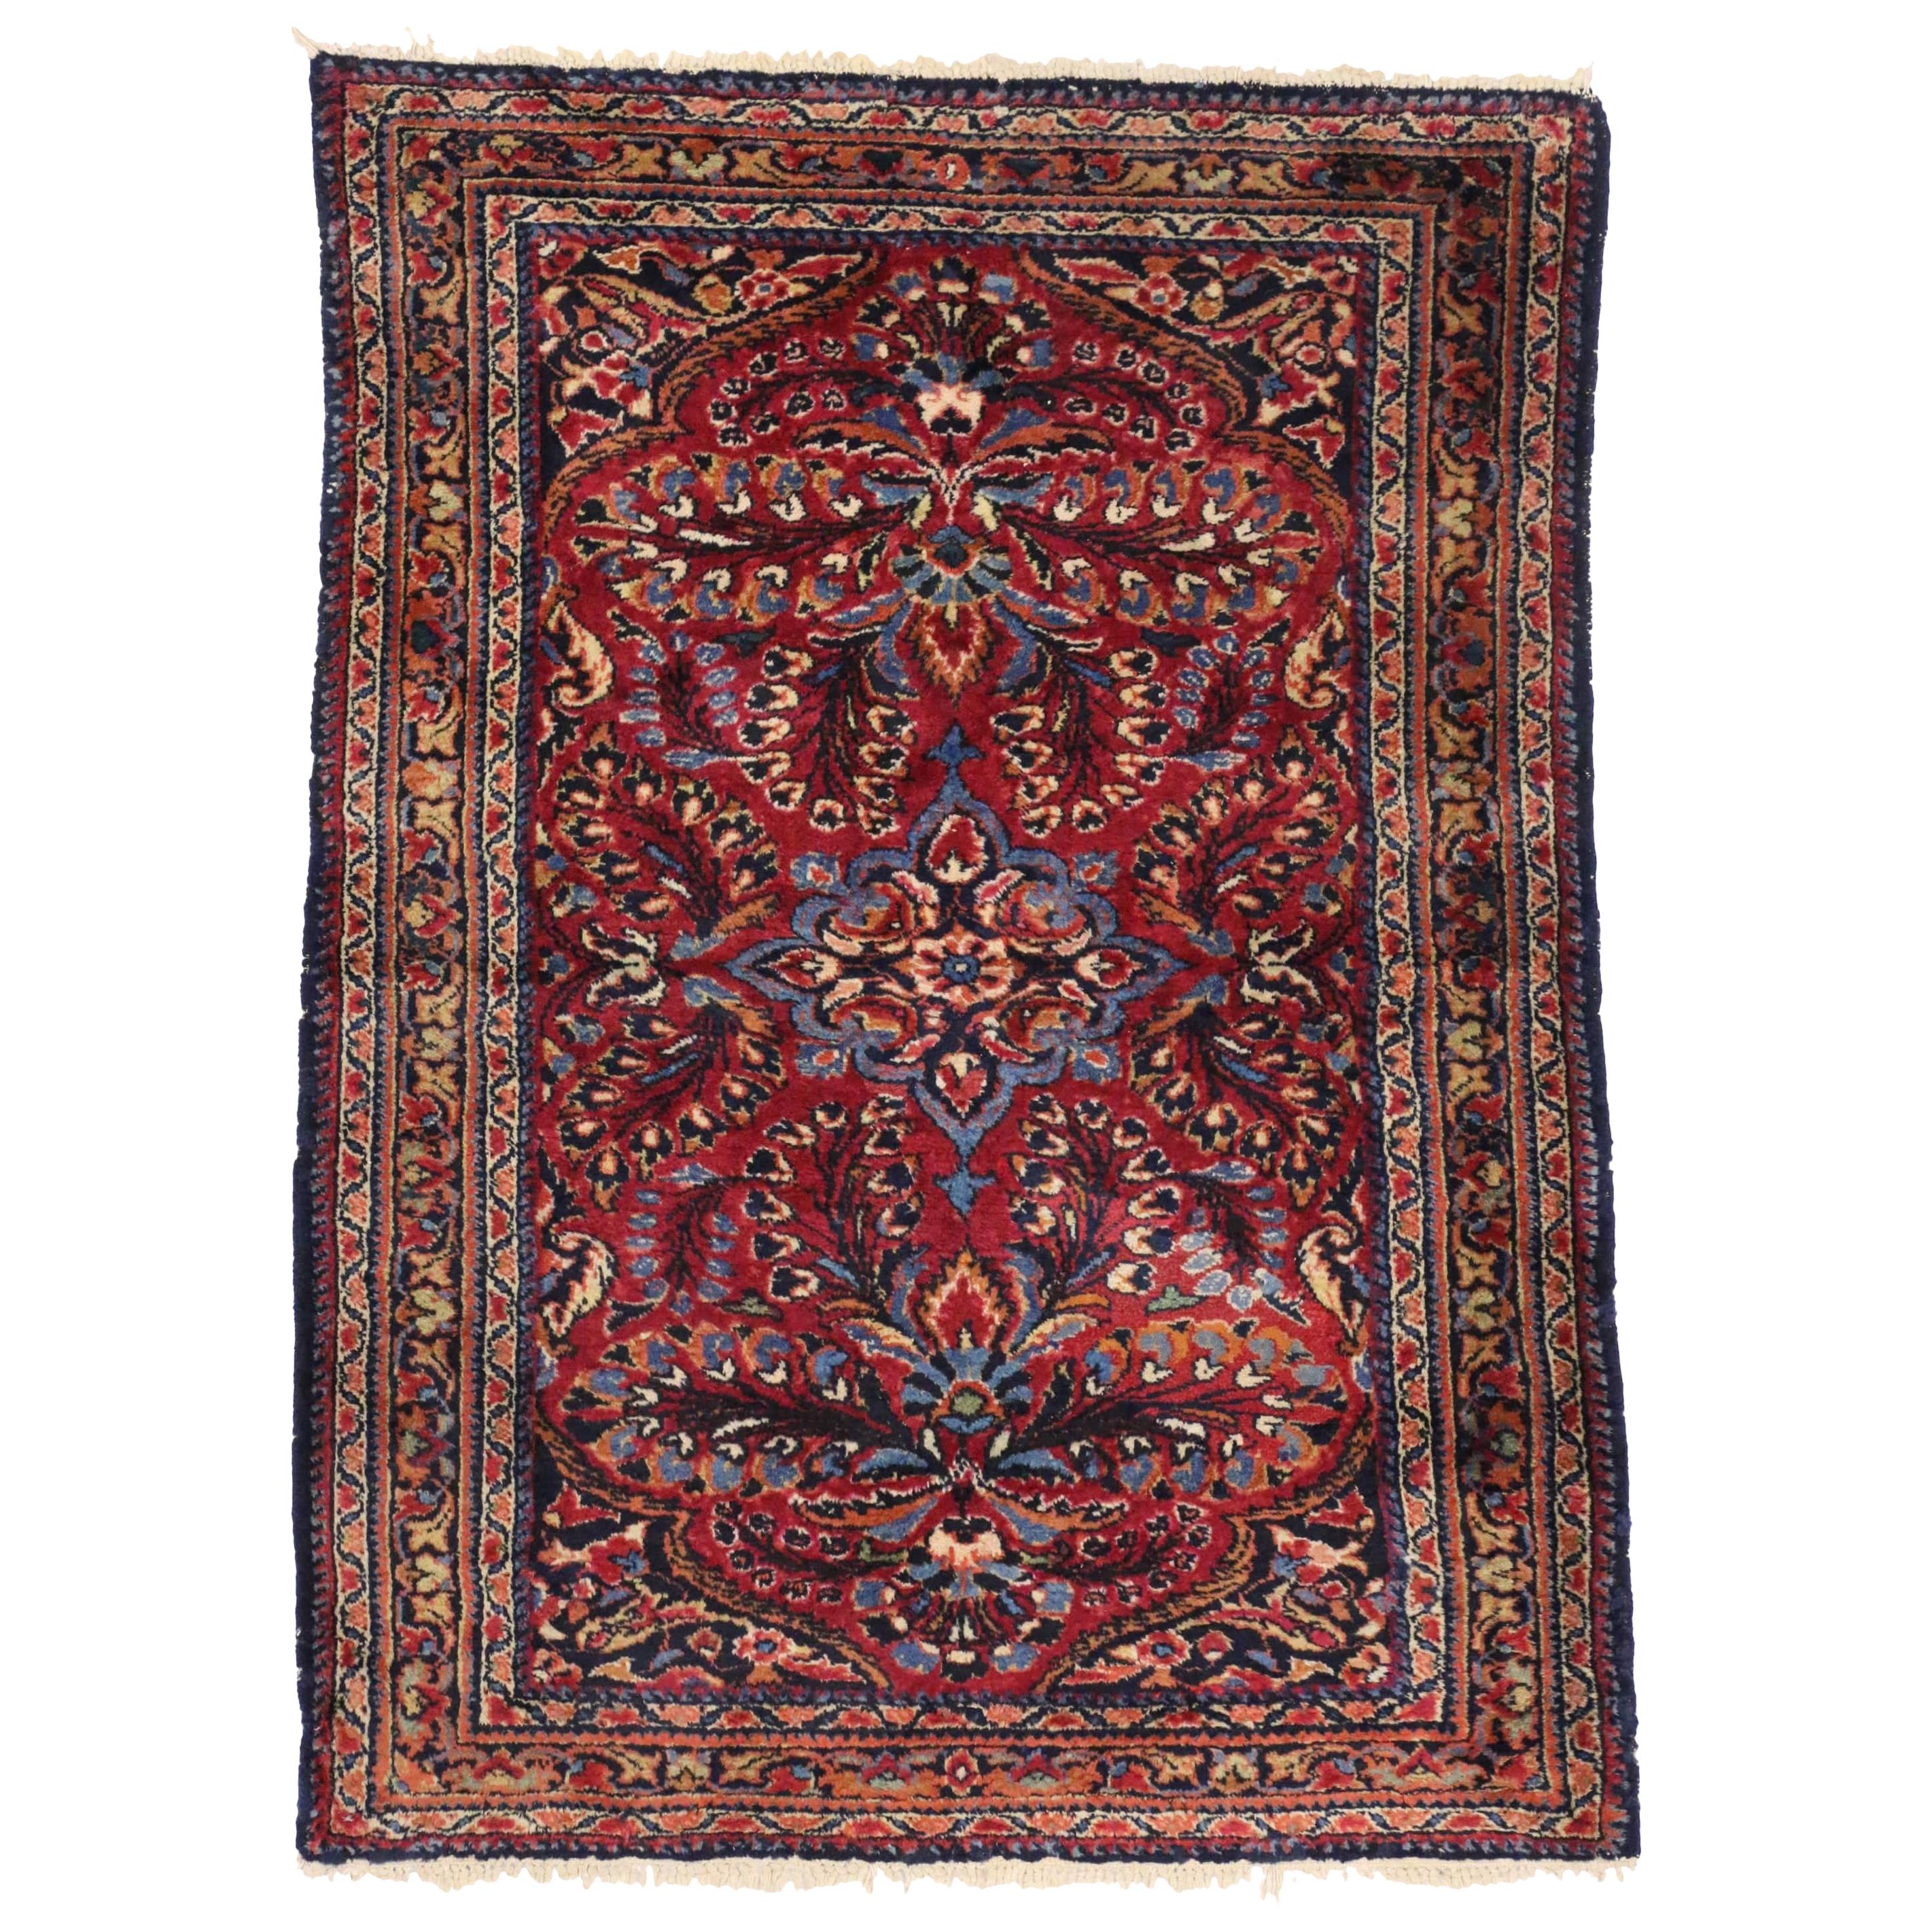 Antique Persian Lilihan Rug with Preppy Jacobean Style